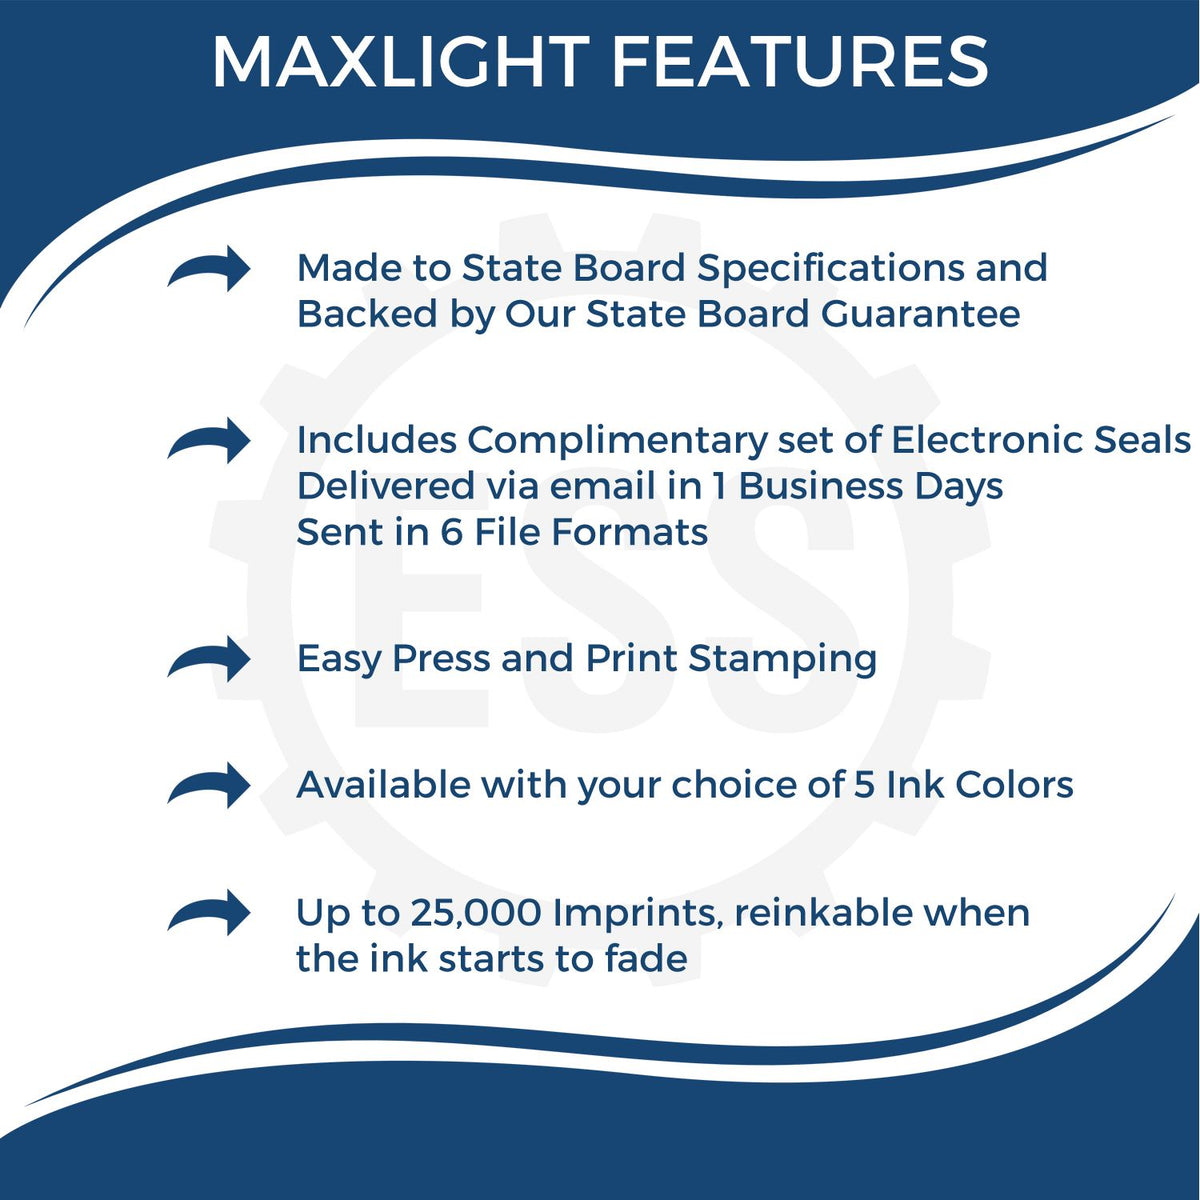 A picture of an infographic highlighting the selling points for the Premium MaxLight Pre-Inked Minnesota Engineering Stamp